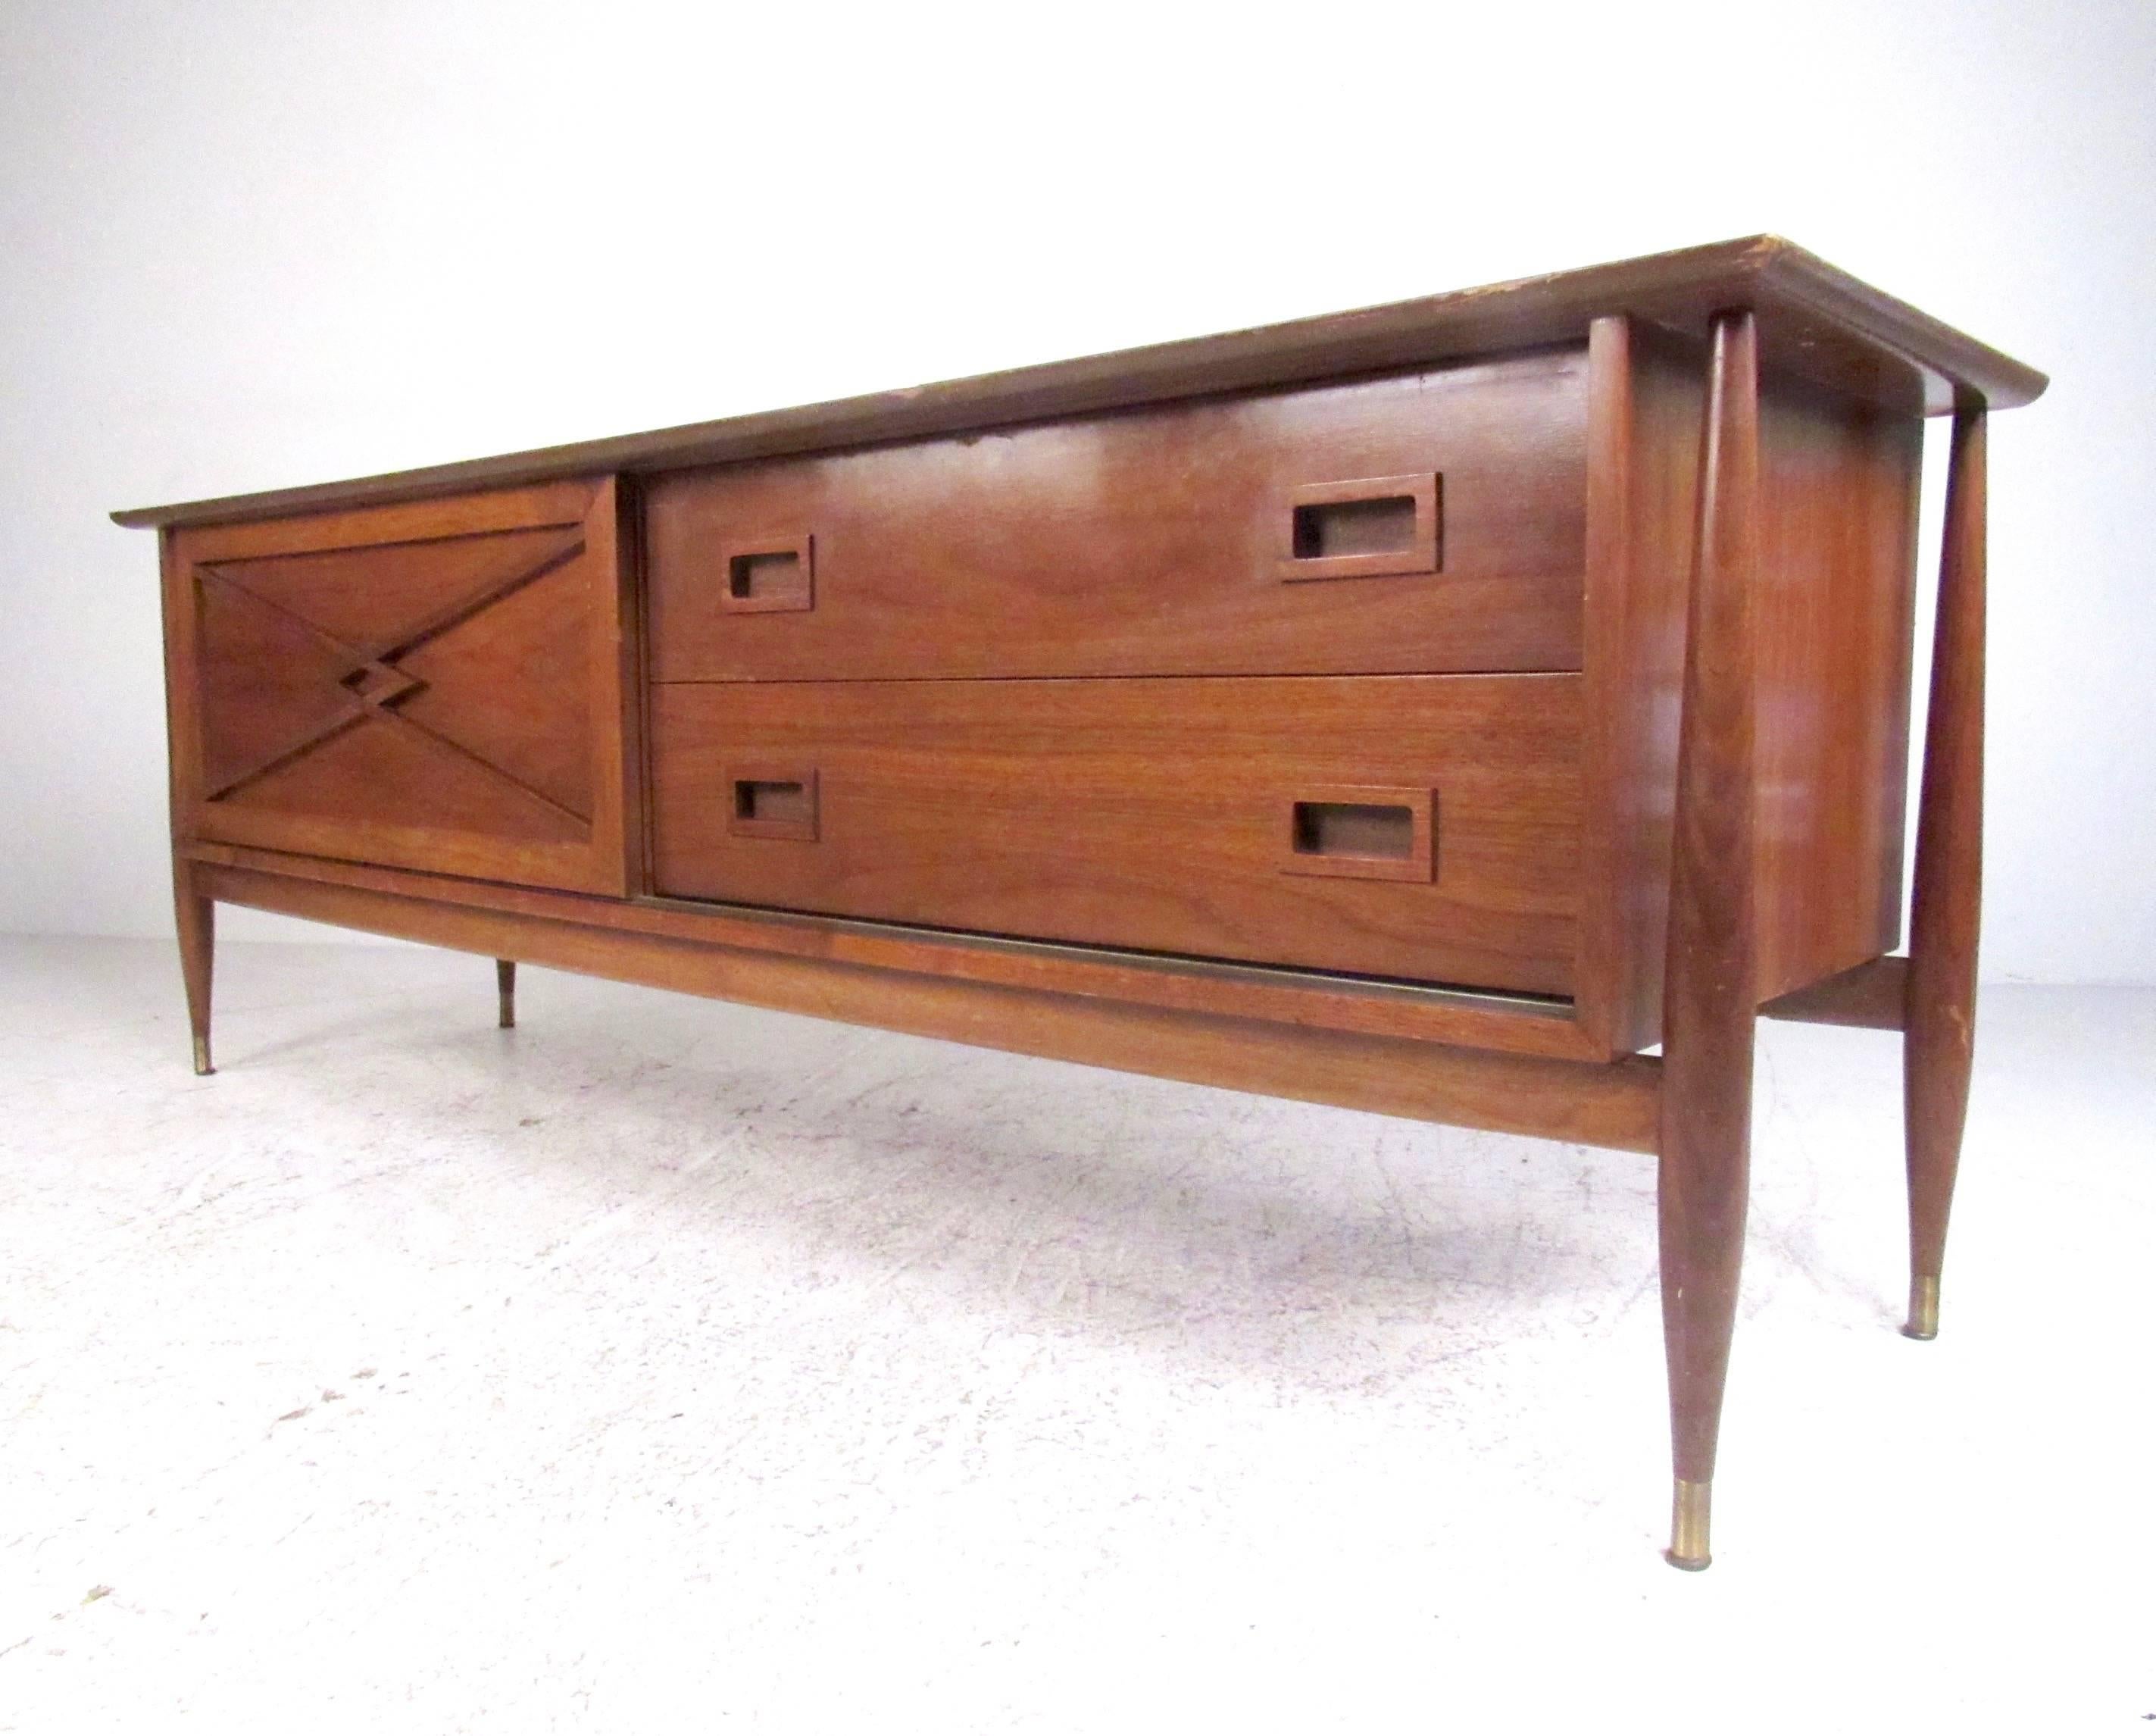 This stylish low credenza makes a perfect media storage console, with sliding cabinet storage and spacious drawers. The low height makes this ideal for use as a television console in living room or office. Mid-Century Modern walnut finish includes